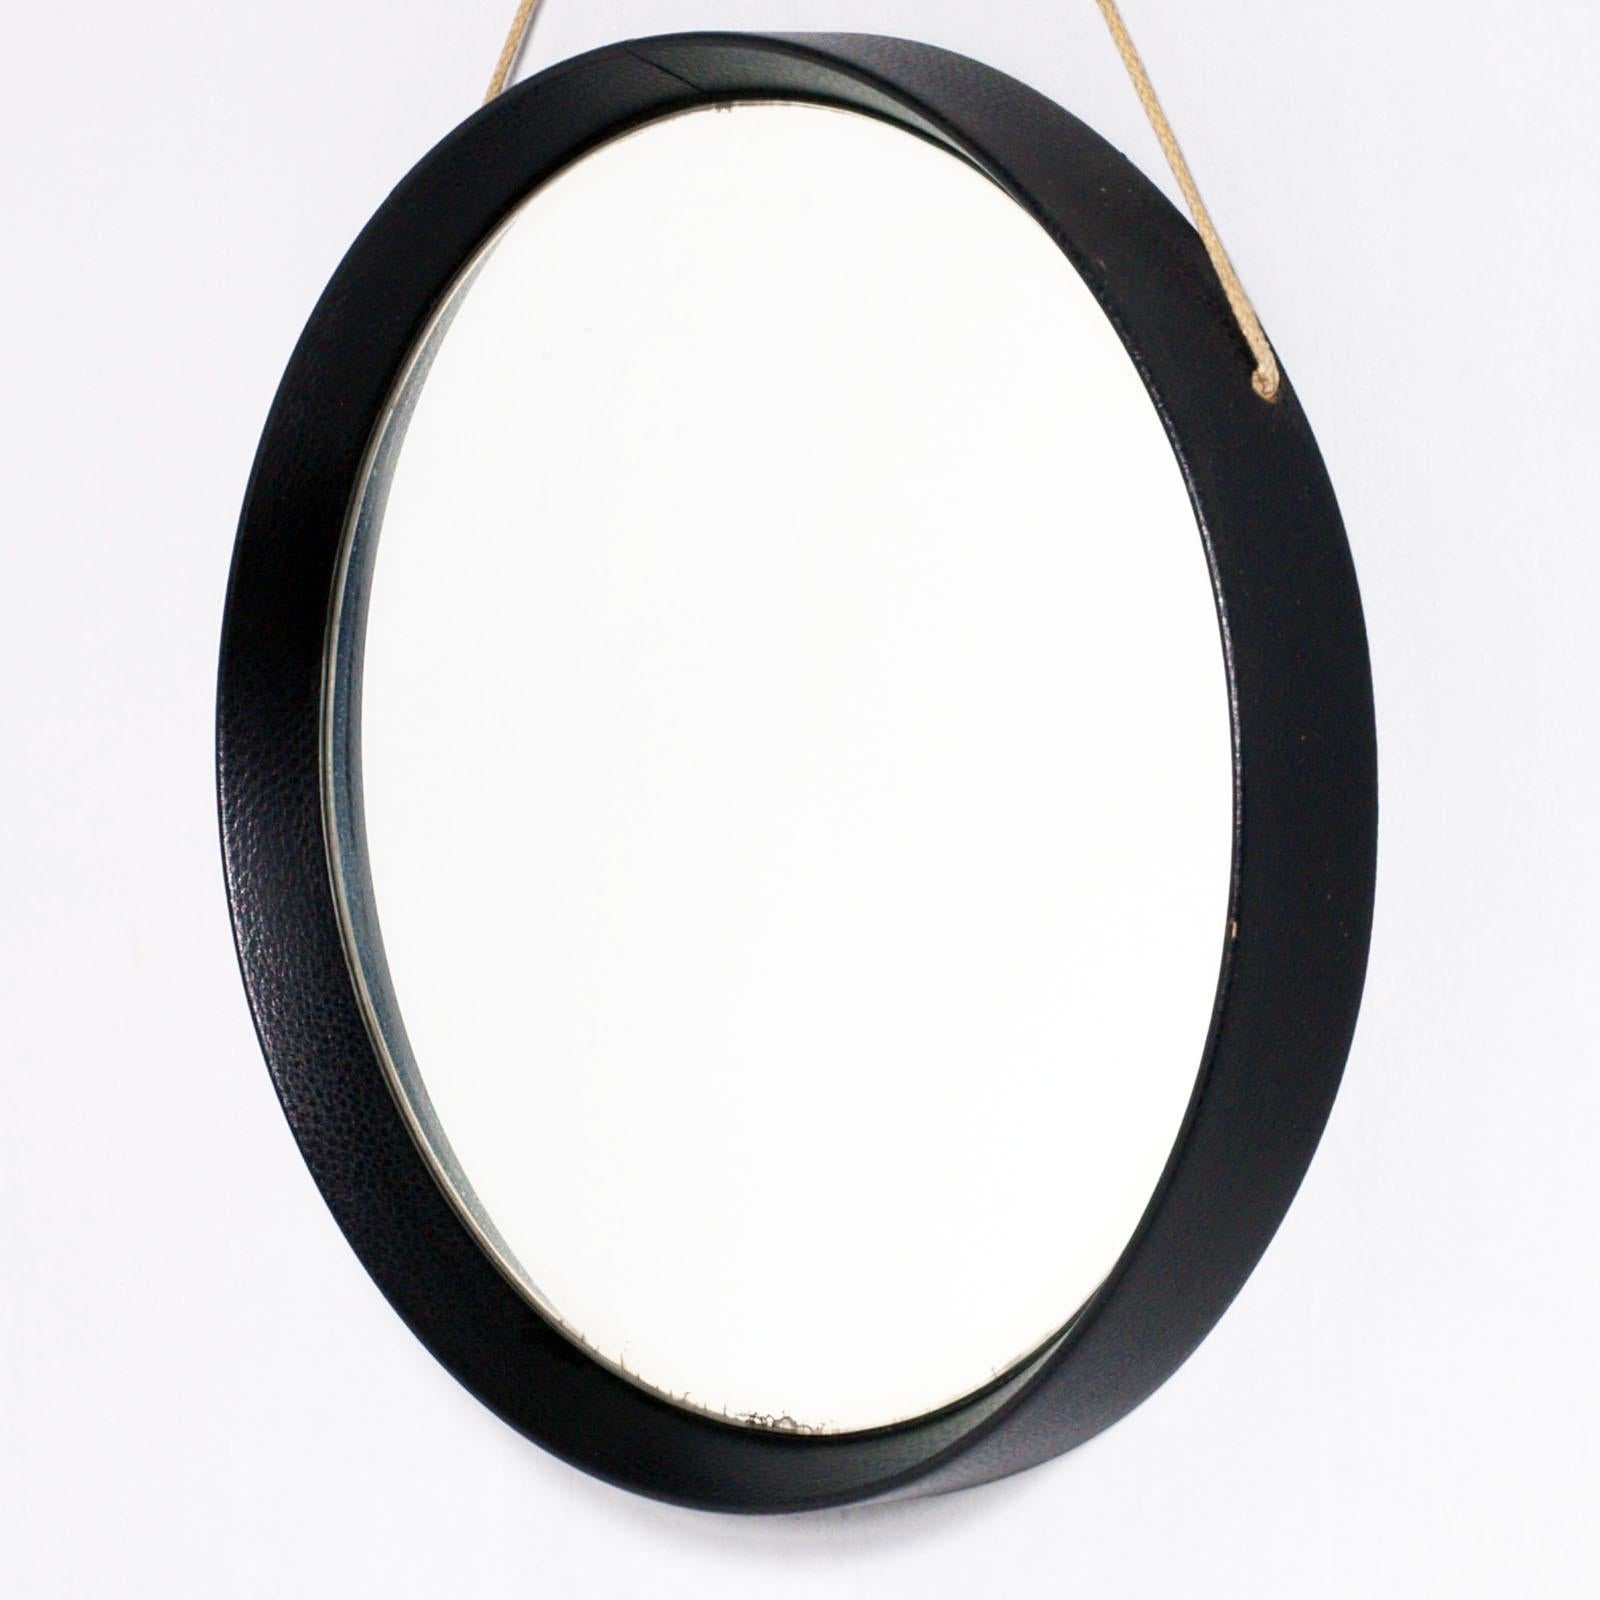 Round Wall Mirror, by Fontana Arte, wood frame leather covered, rope hanging. 
Very rare mirror of the Fontanit which was followed by numerous fashionable productions in Italy and throughout the world.
The hanging rope is worn in the part of